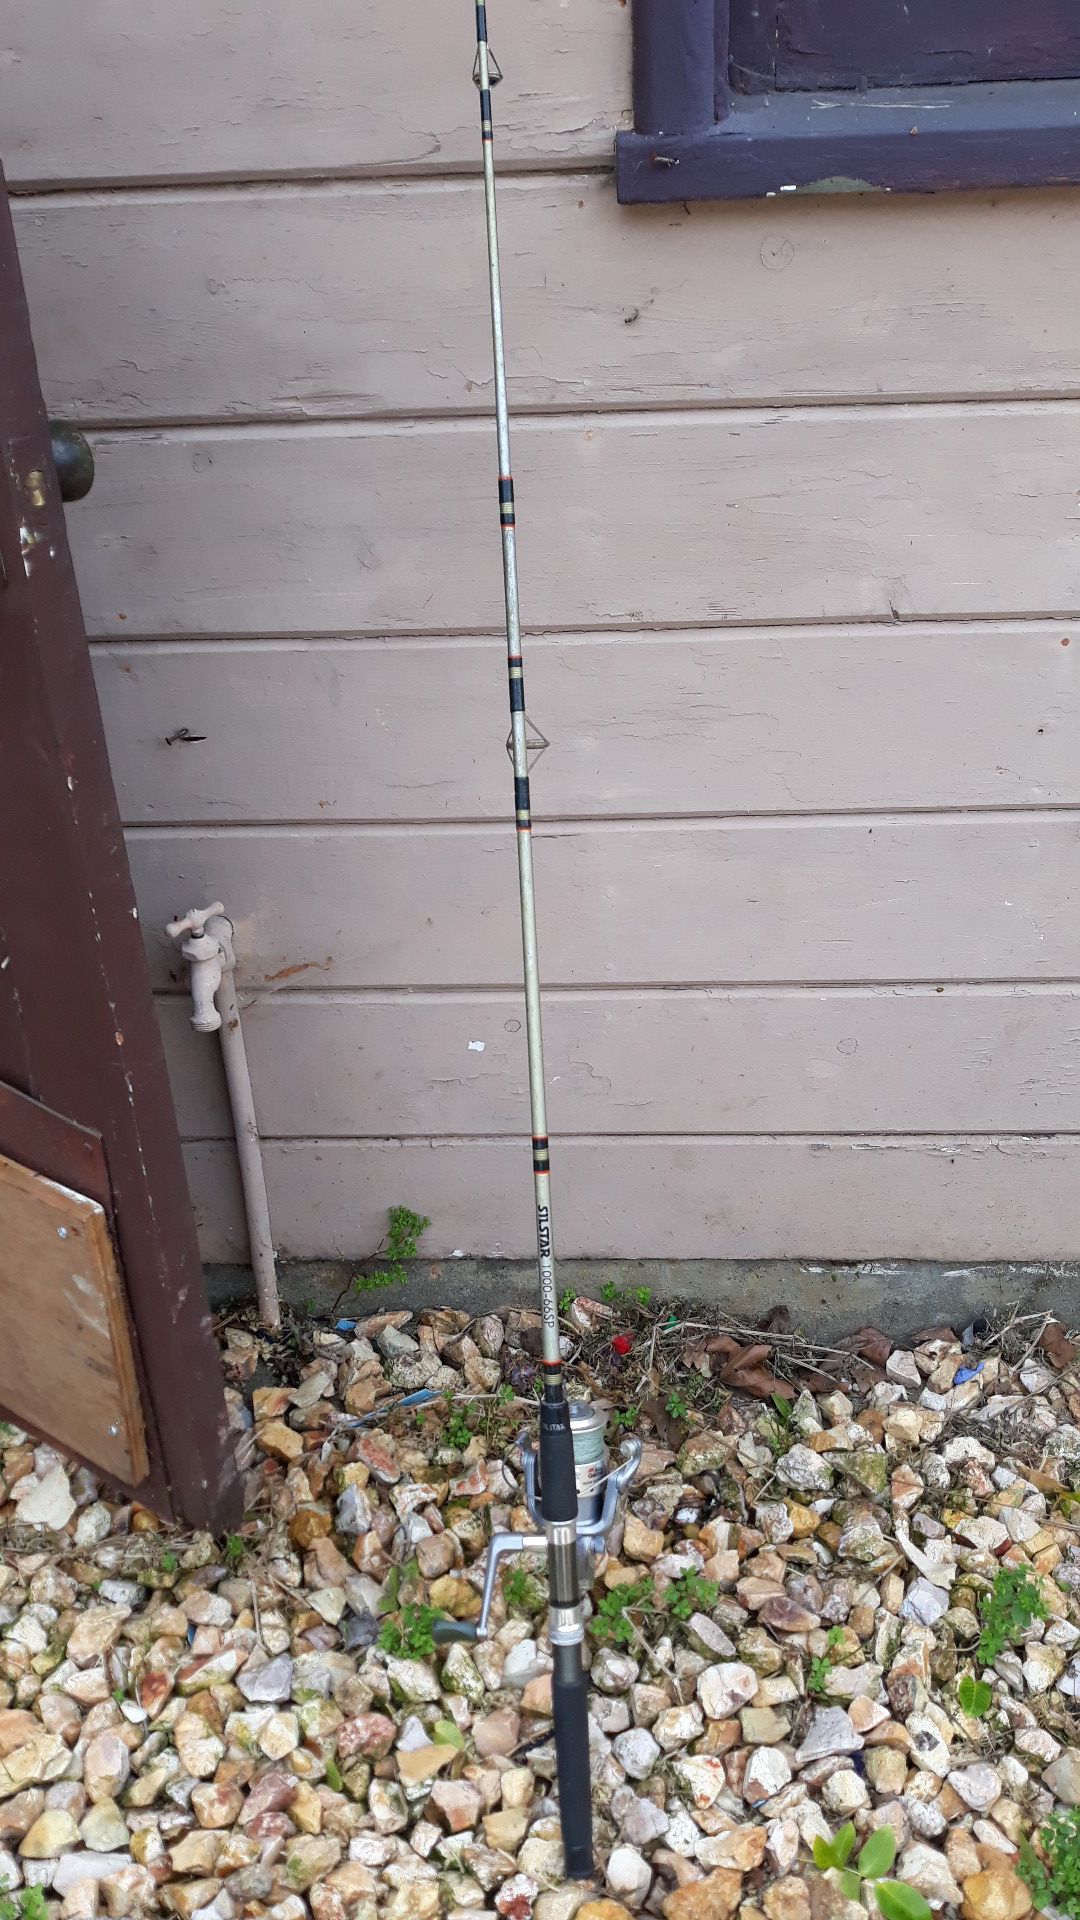 Silstar fishing pole with reel